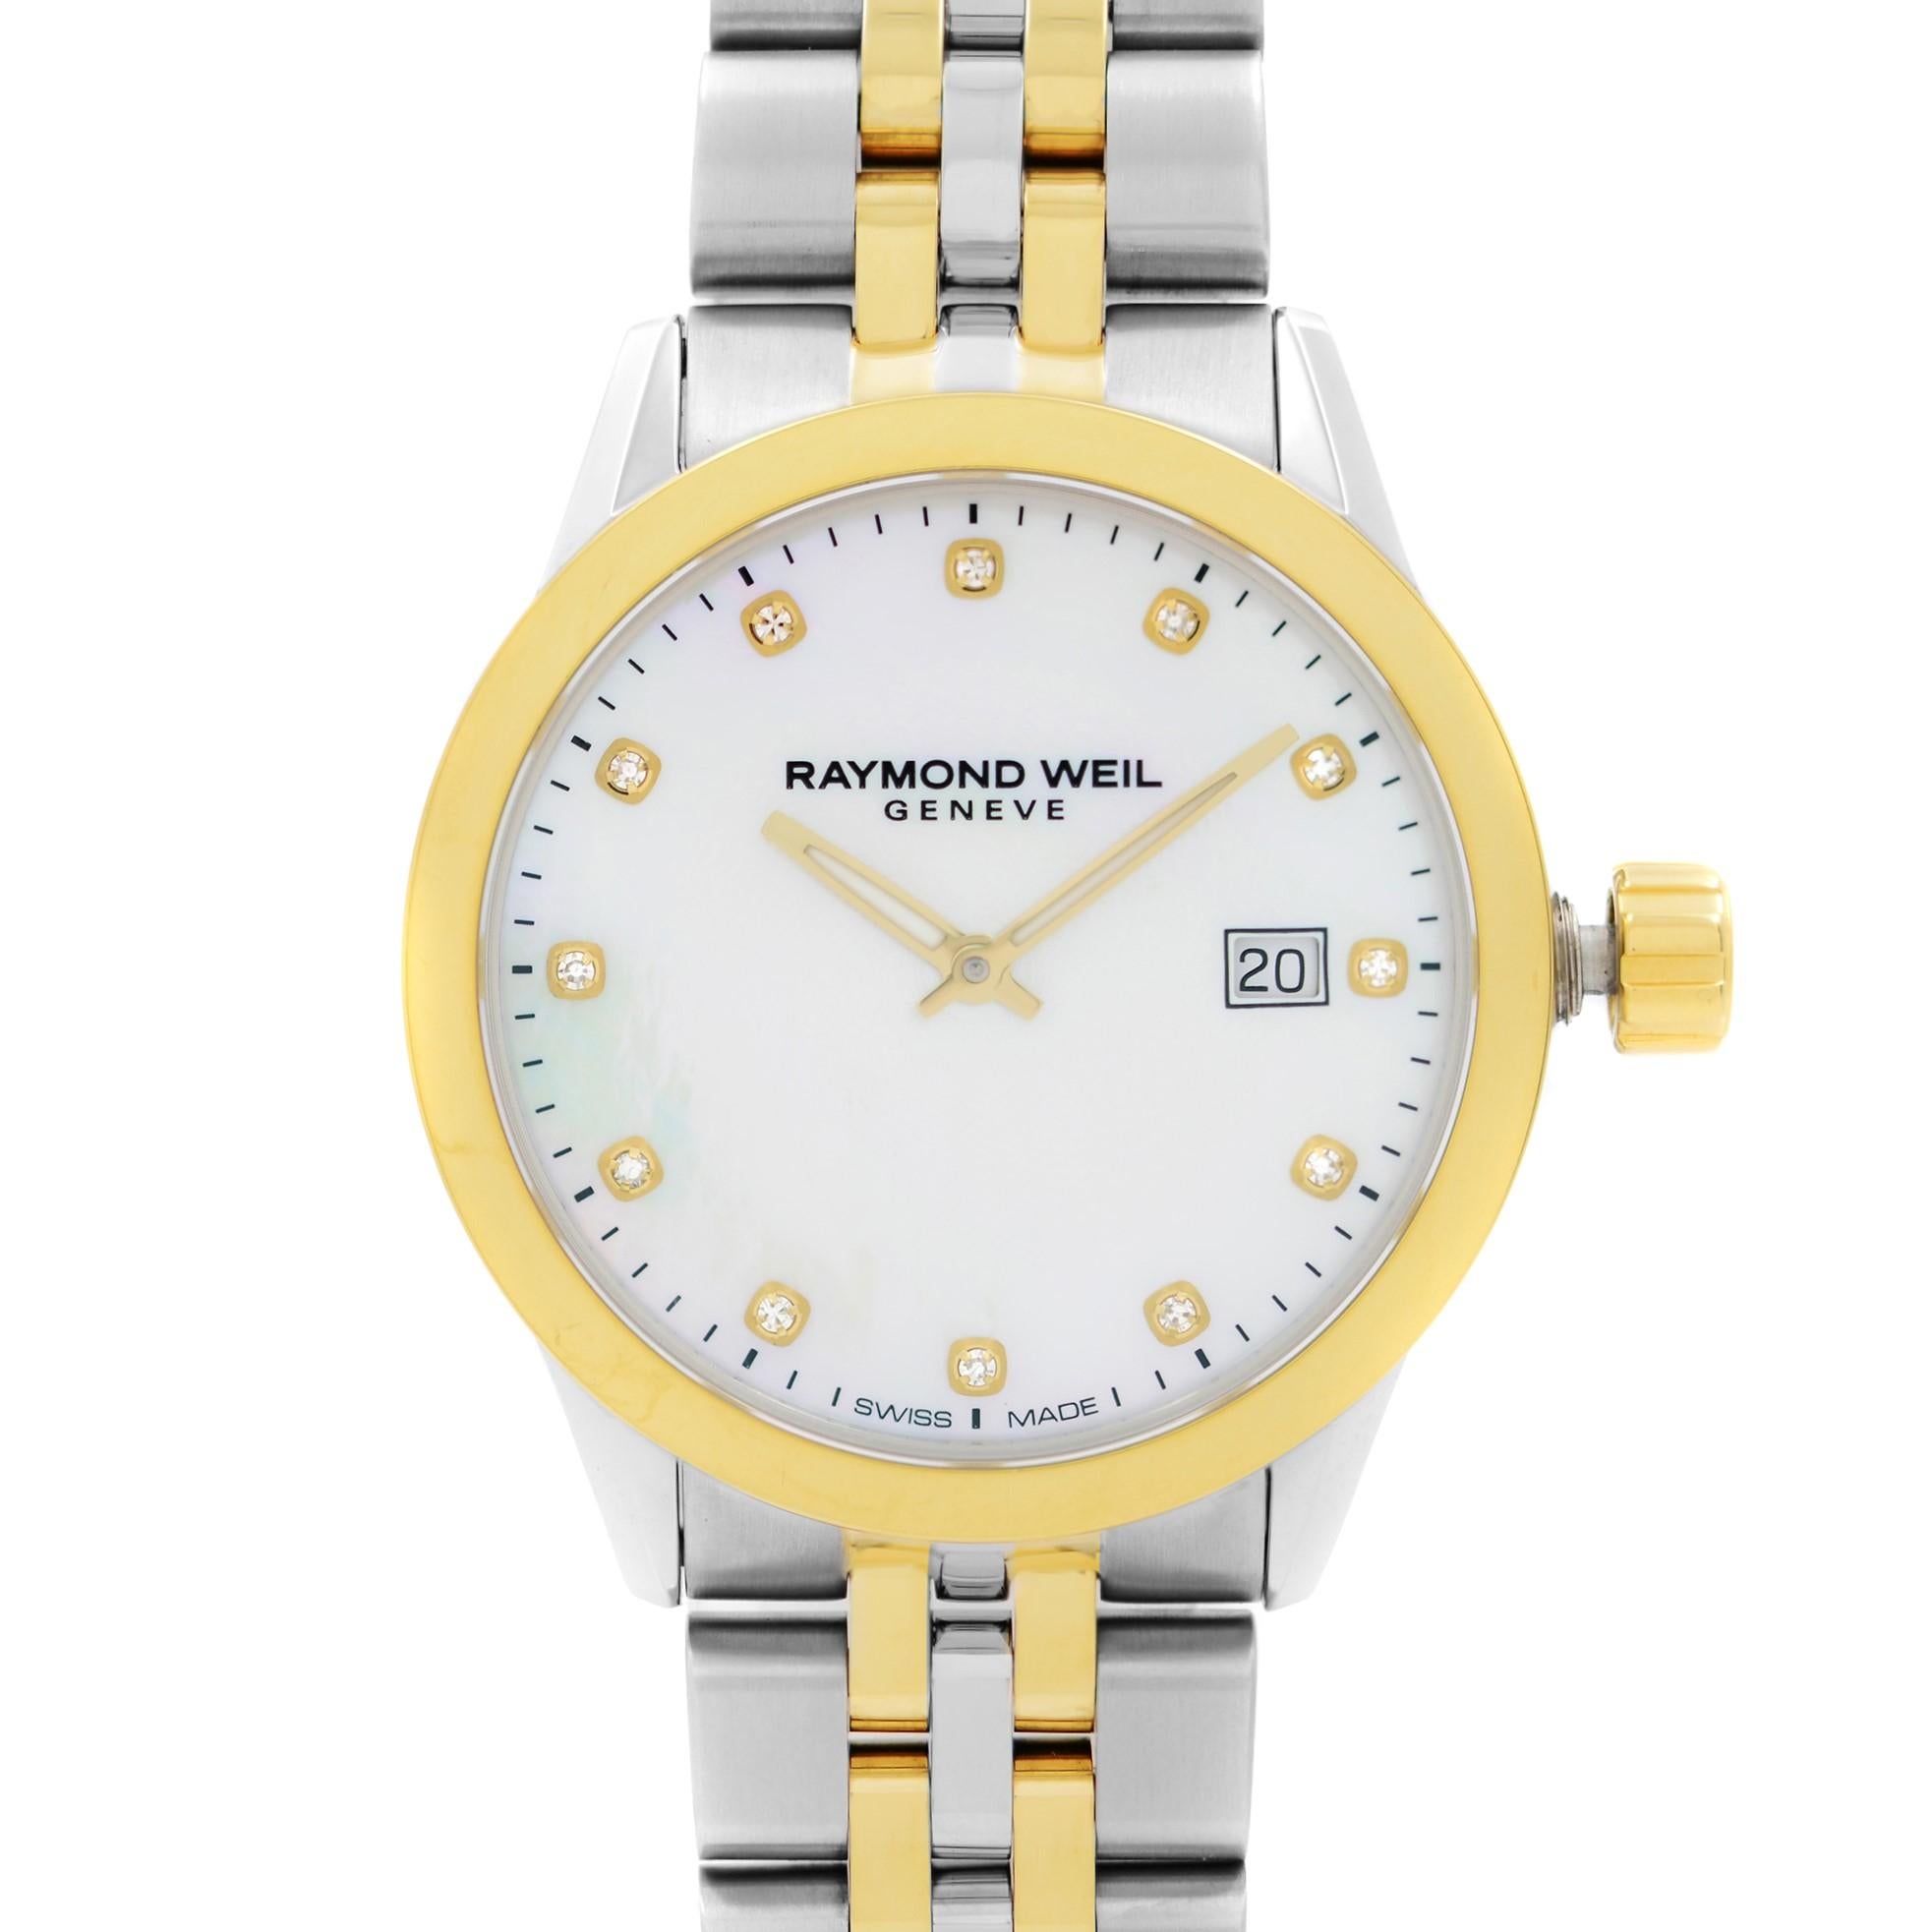 Store Display Model Never Worn. Can have minor blemishes on gold tone parts.  Raymond Weil Freelancer Two-Tone Steel MOP Dial Quartz Ladies Watch 5629-STP-97081. This Beautiful Timepiece Features: Stainless Steel Case with a Two-Tone Stainless Steel